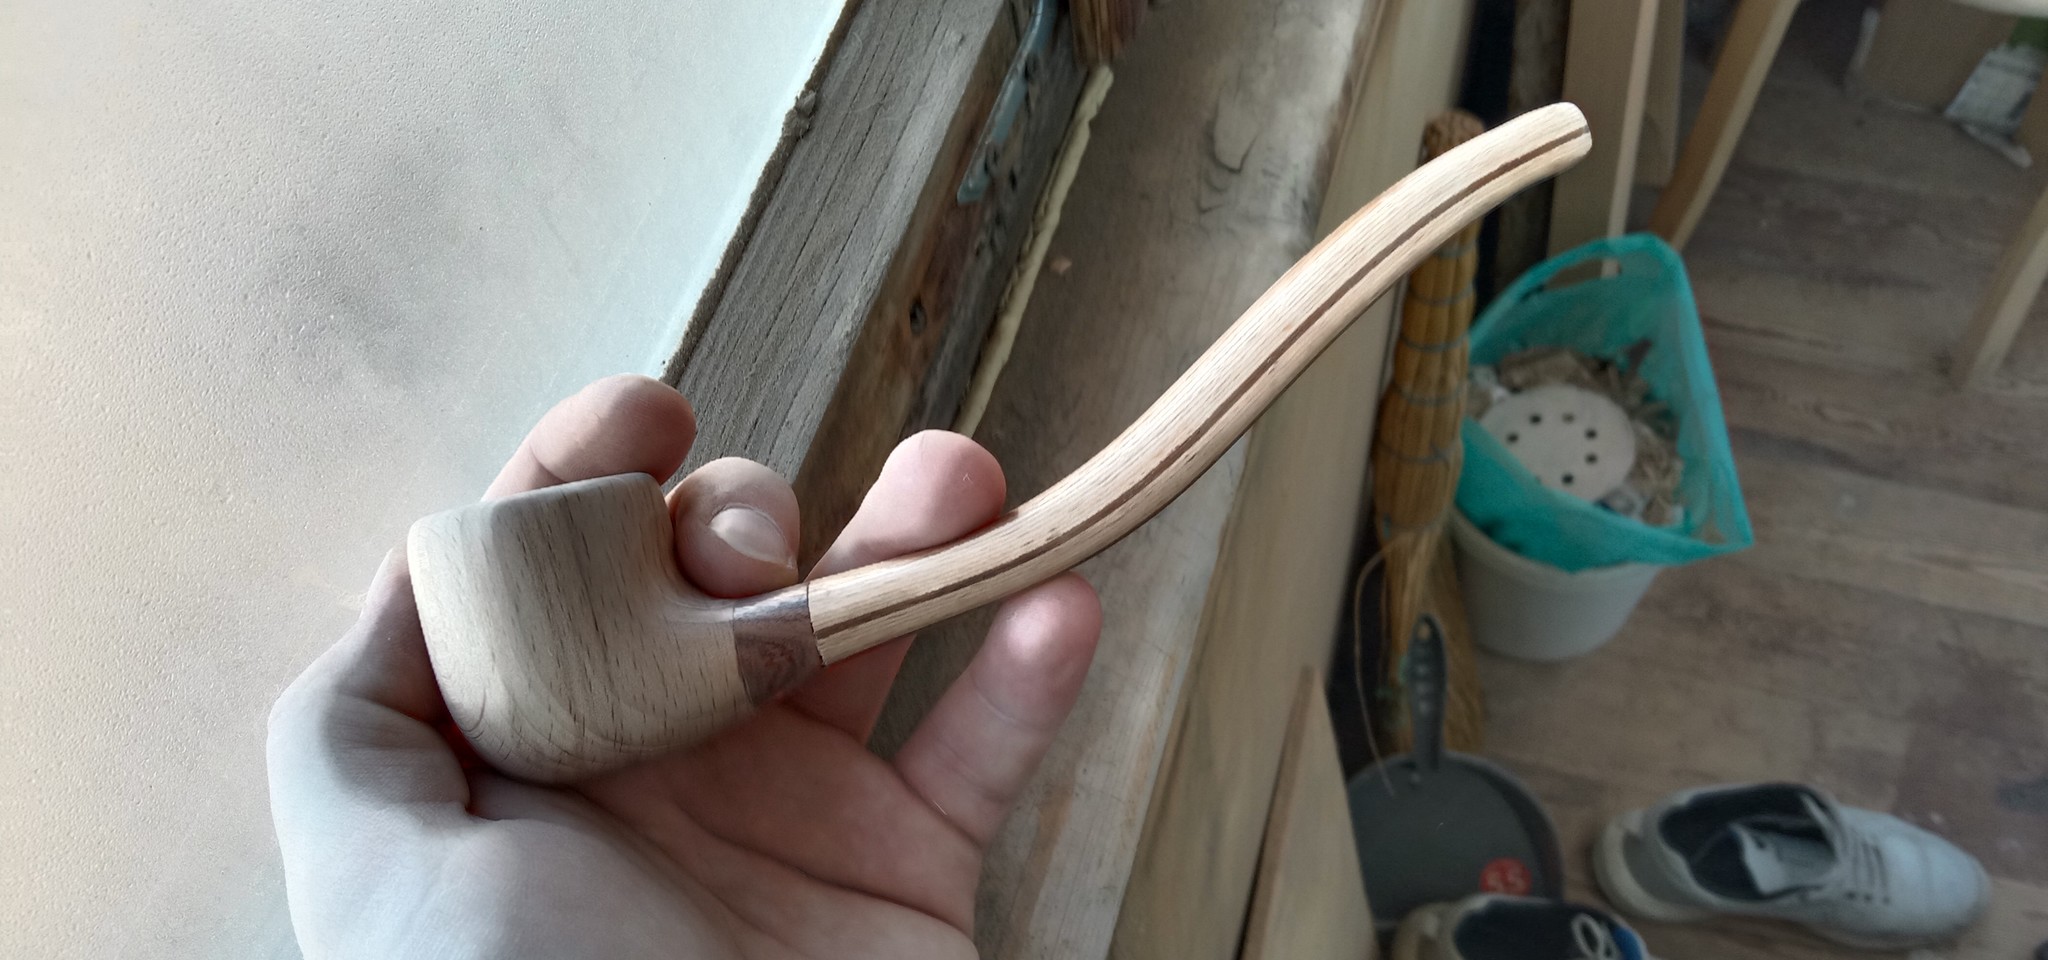 A story of perseverance that leads nowhere - My, Woodworking, Needlework with process, A tube, Longpost